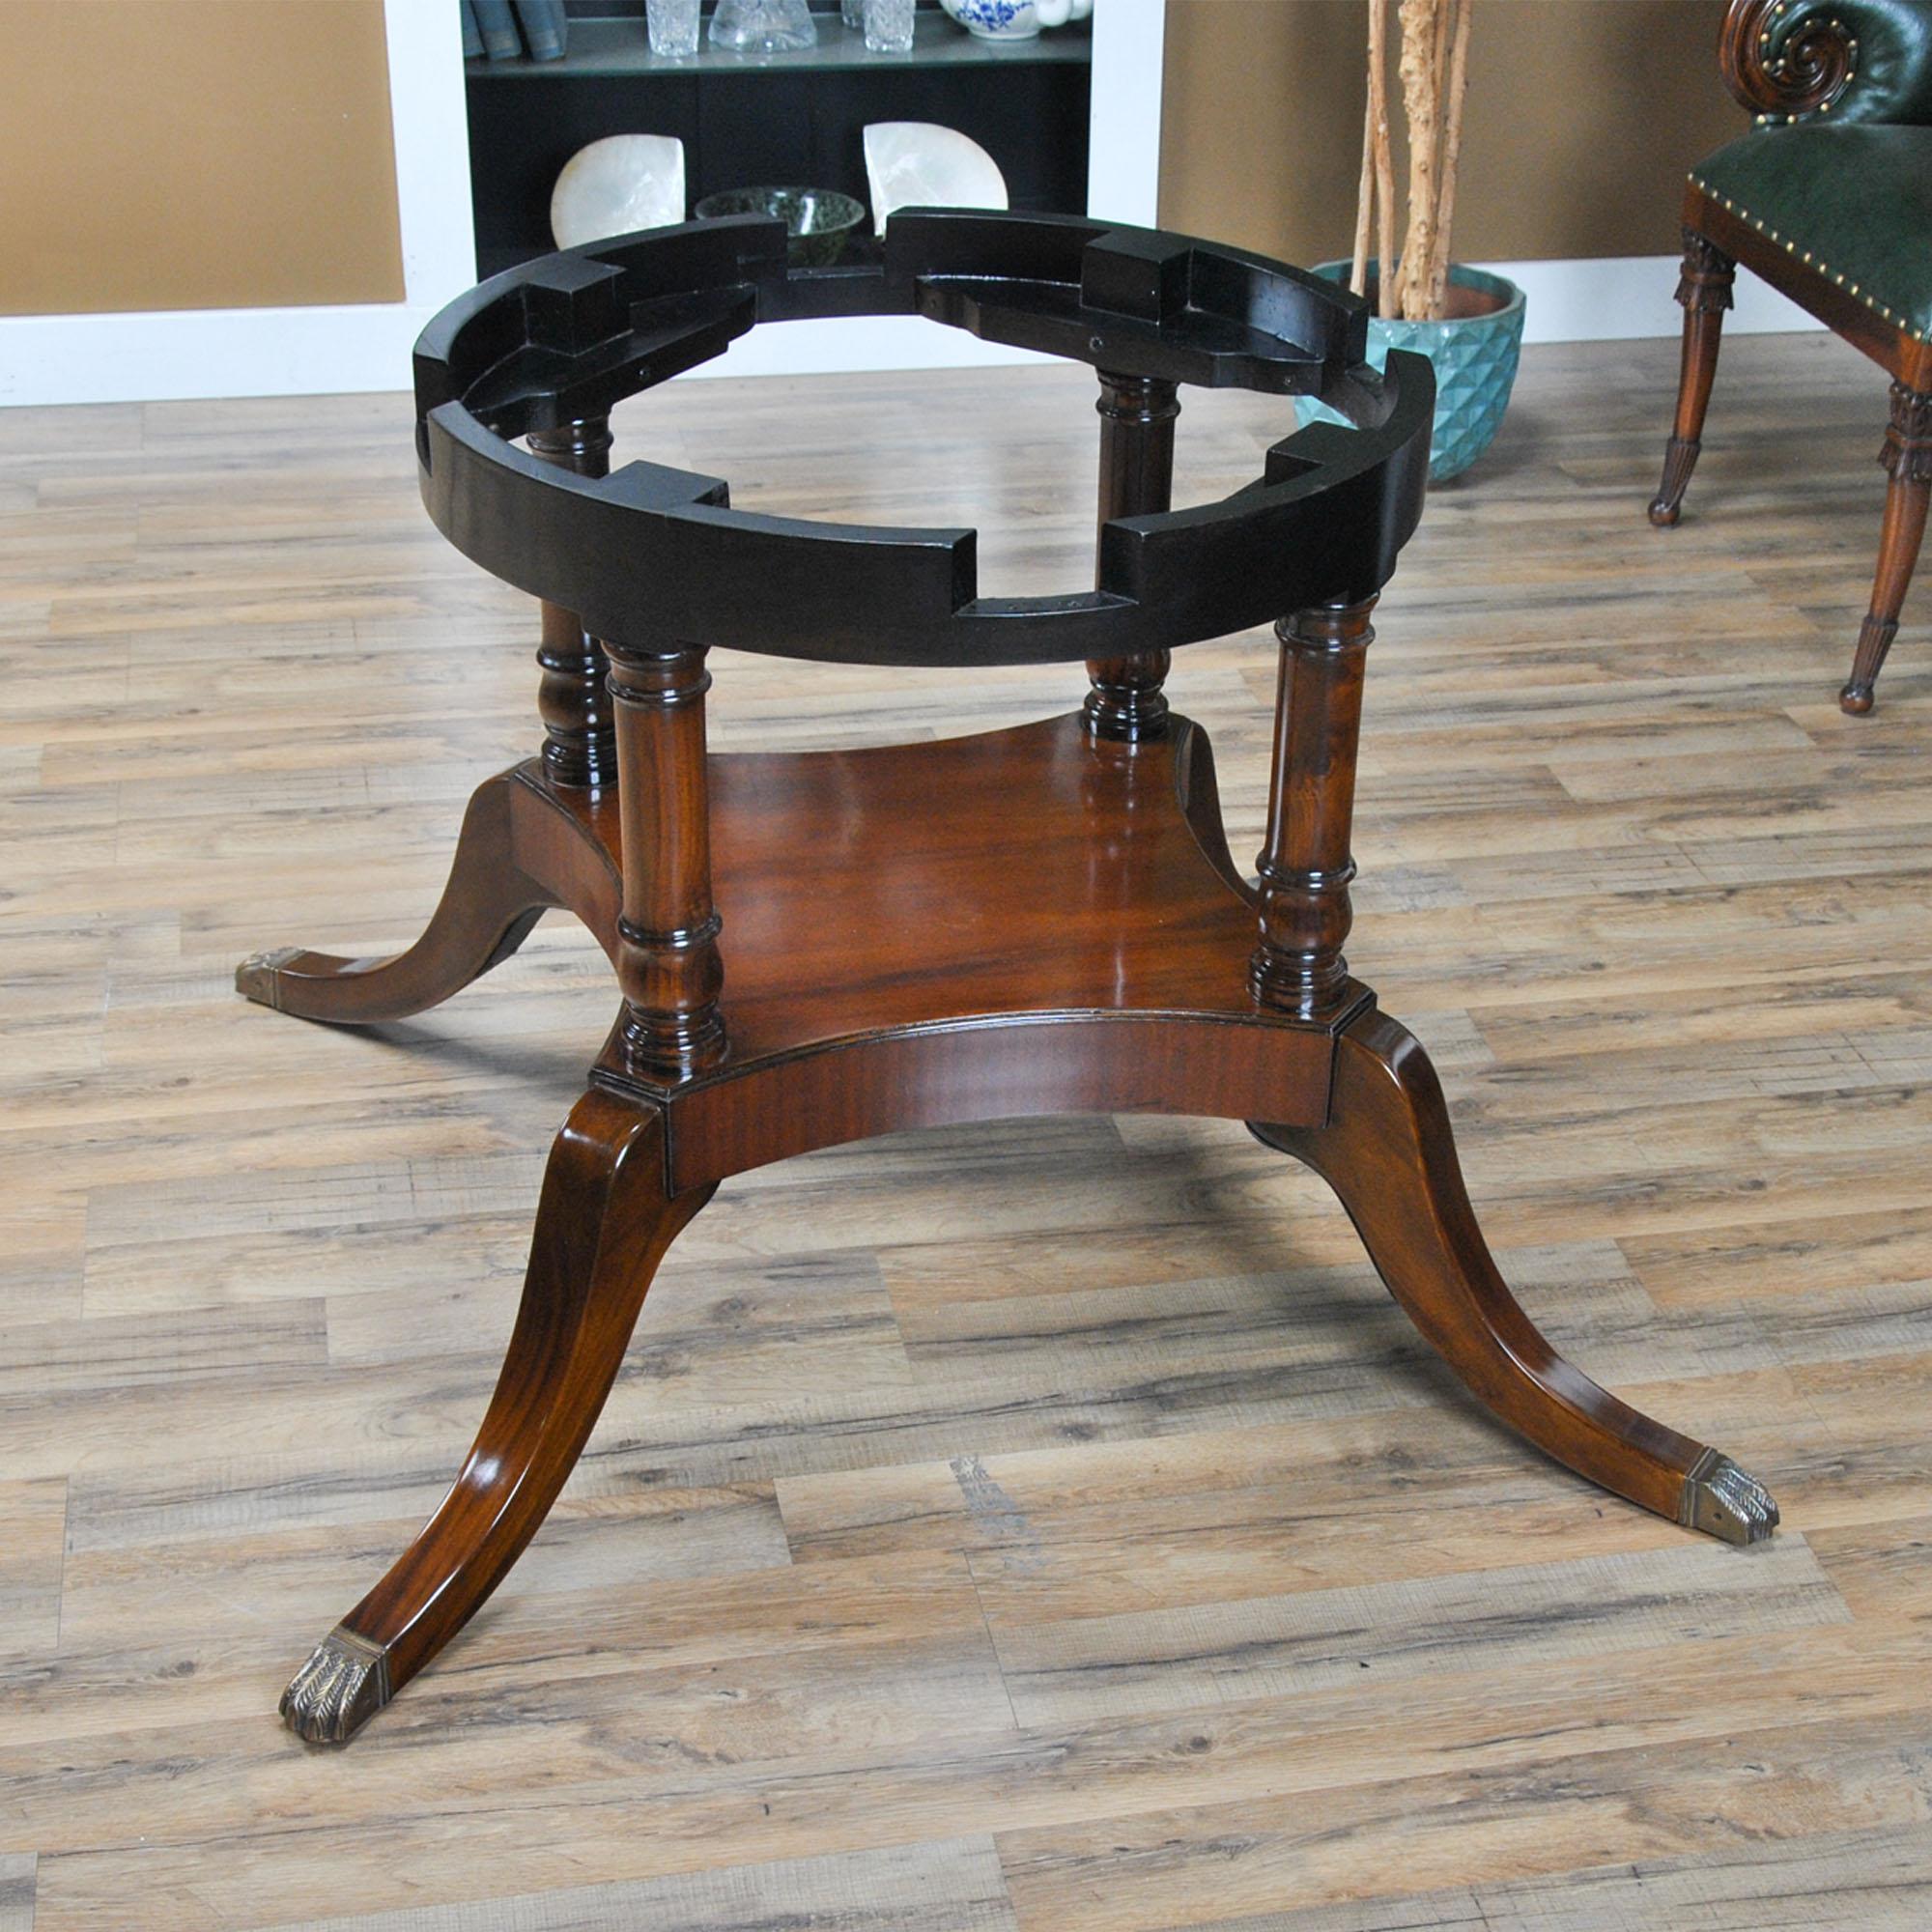 60 inch round table for sale